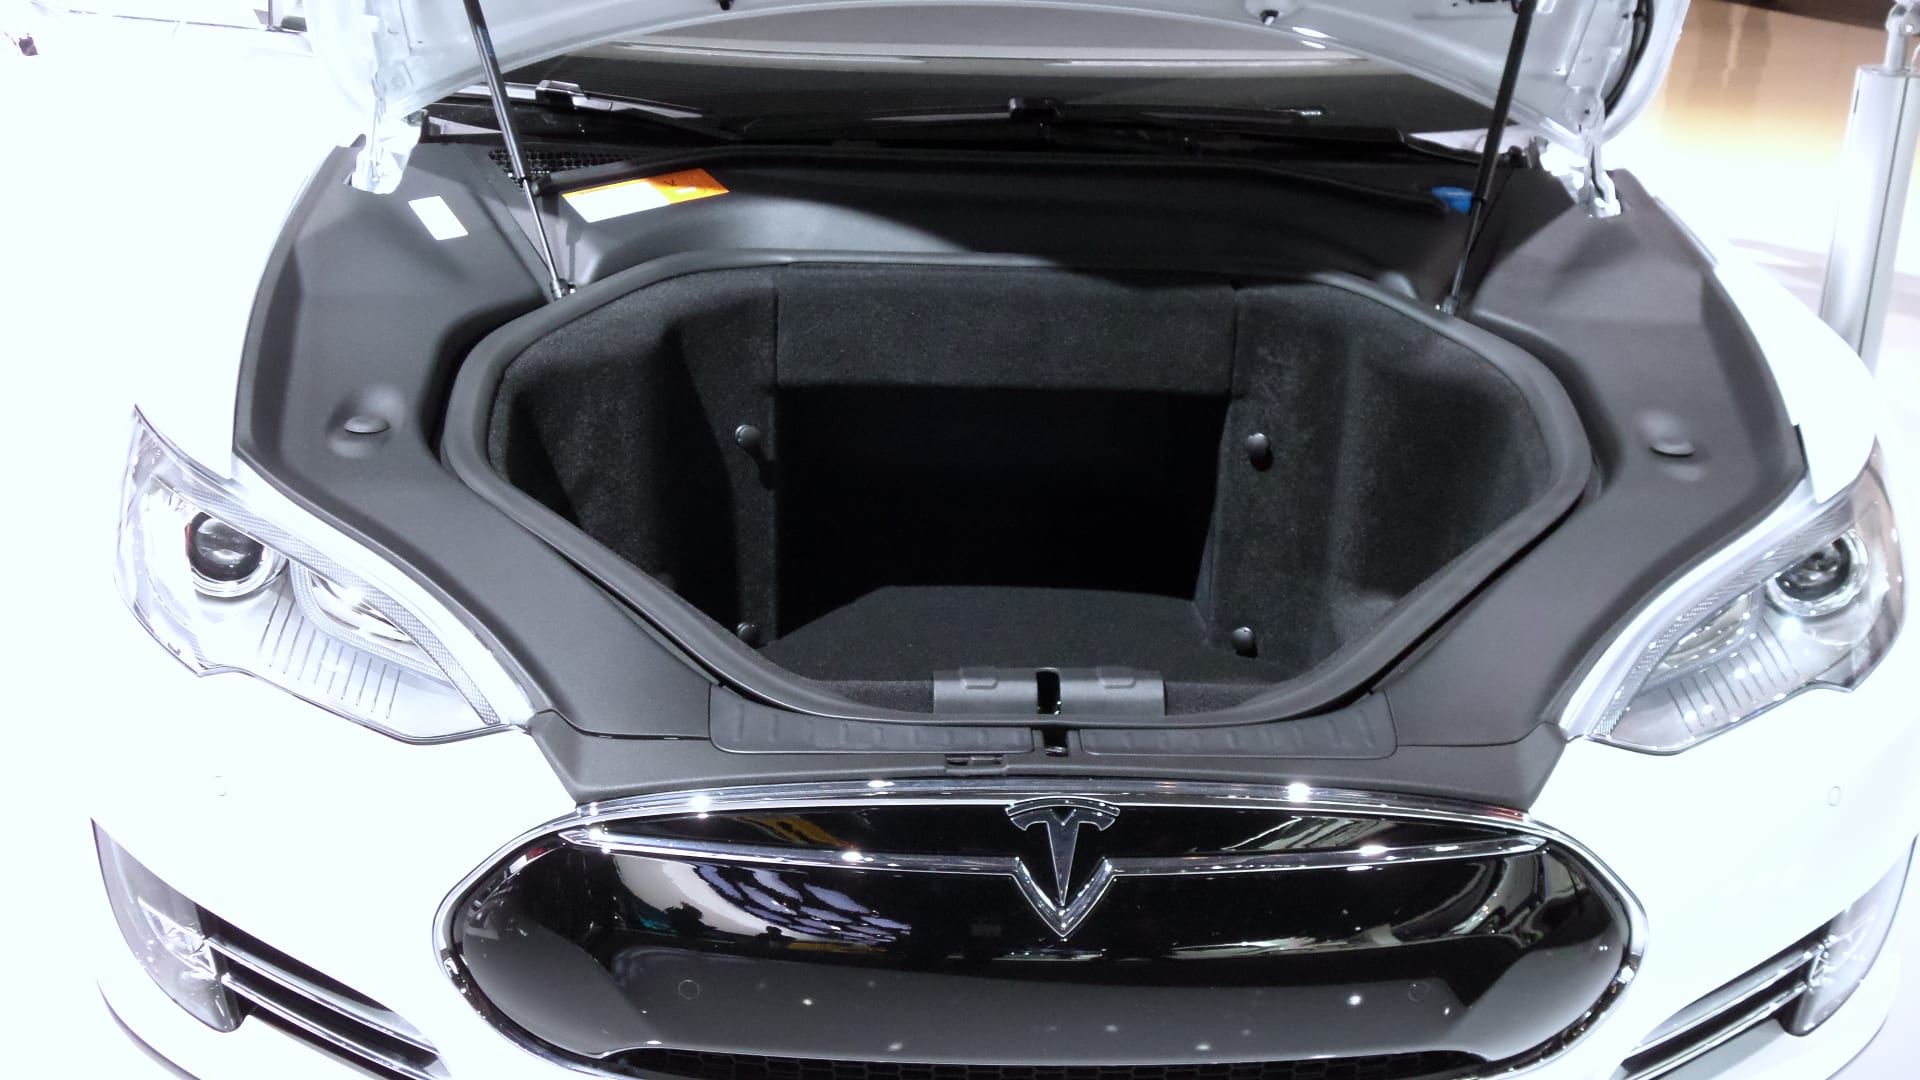 The front trunk of the white Tesla Model S.